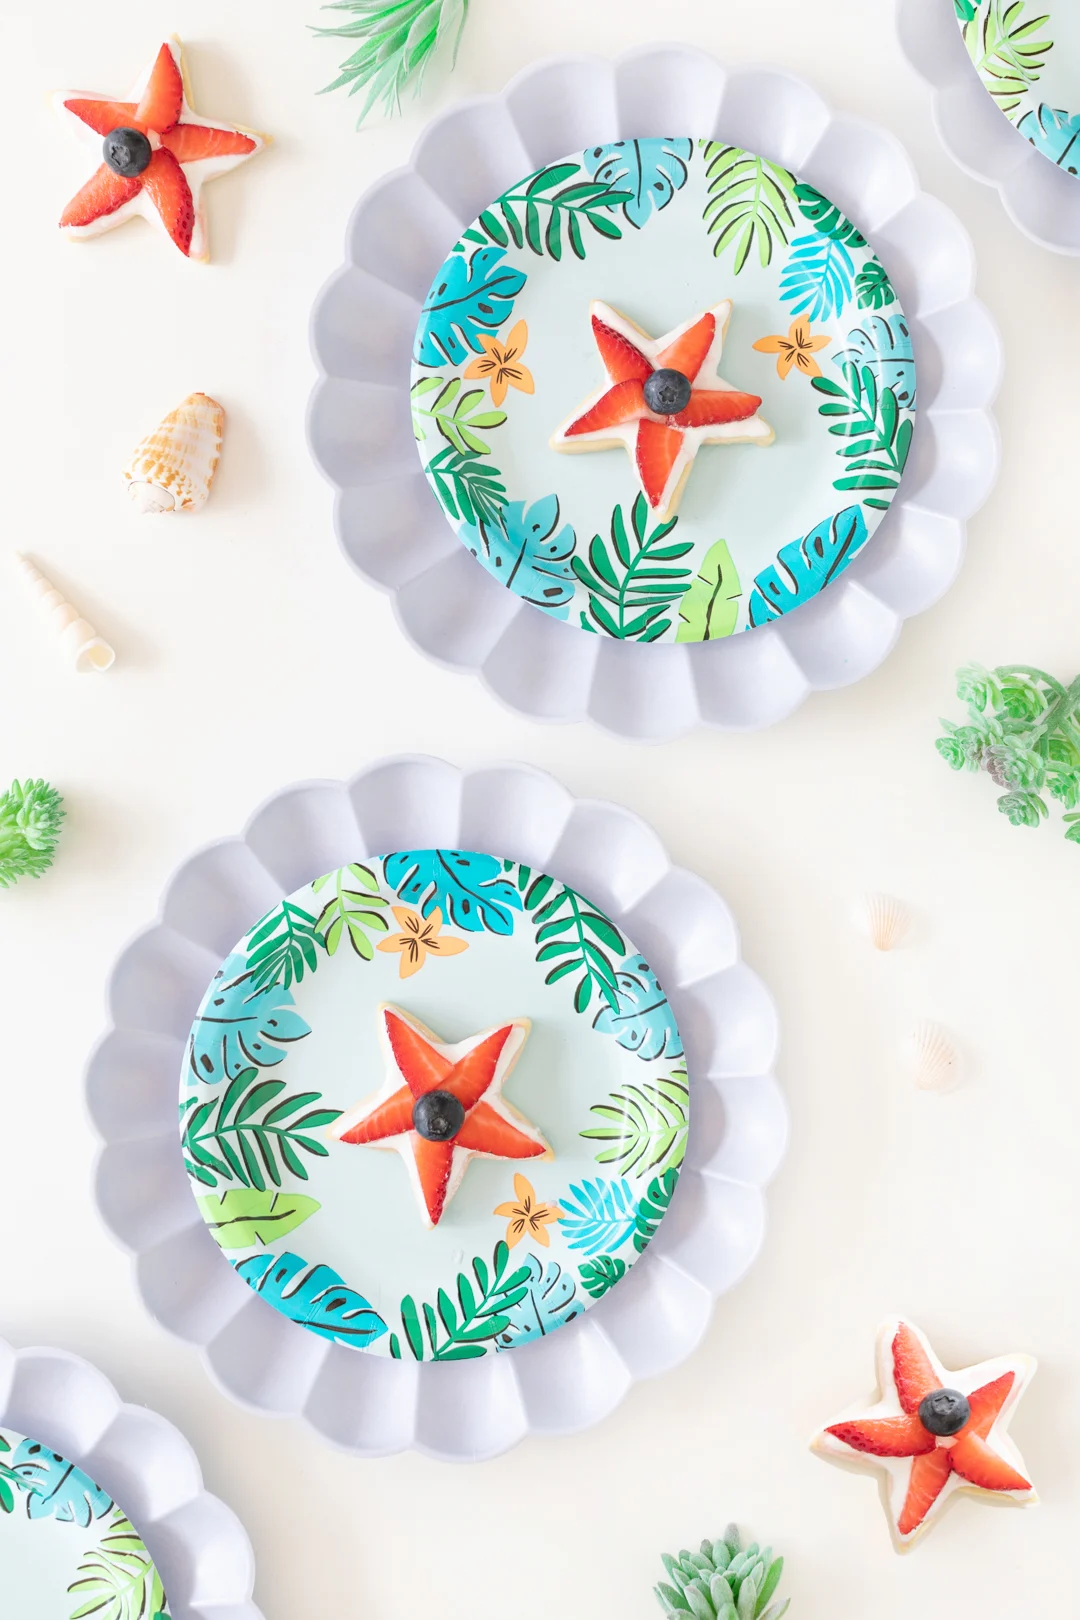 strawberry and blueberry star-shaped sugar cookies set out on cute tropical paper plates with a sea shell charger.